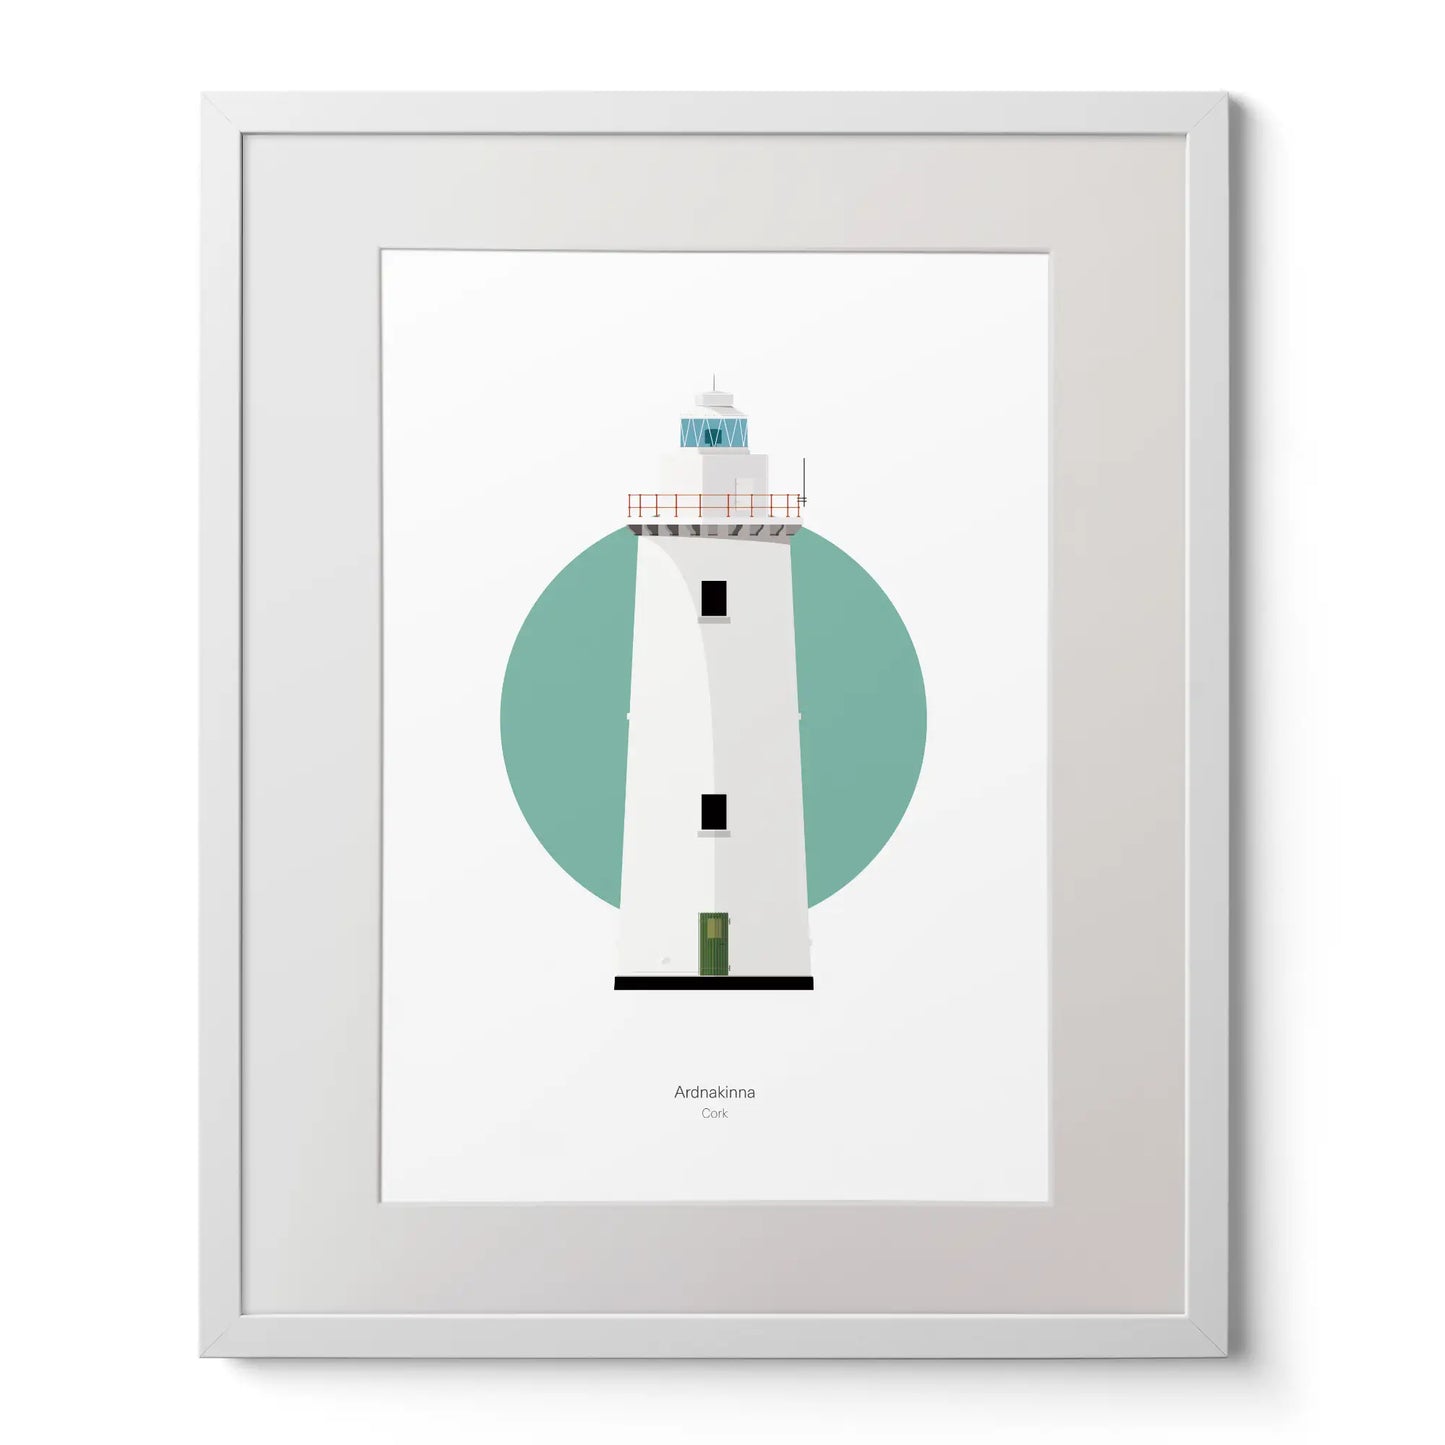 Illustration of Ardnakinna lighthouse on a white background inside light blue square,  in a white frame measuring 40x50cm.